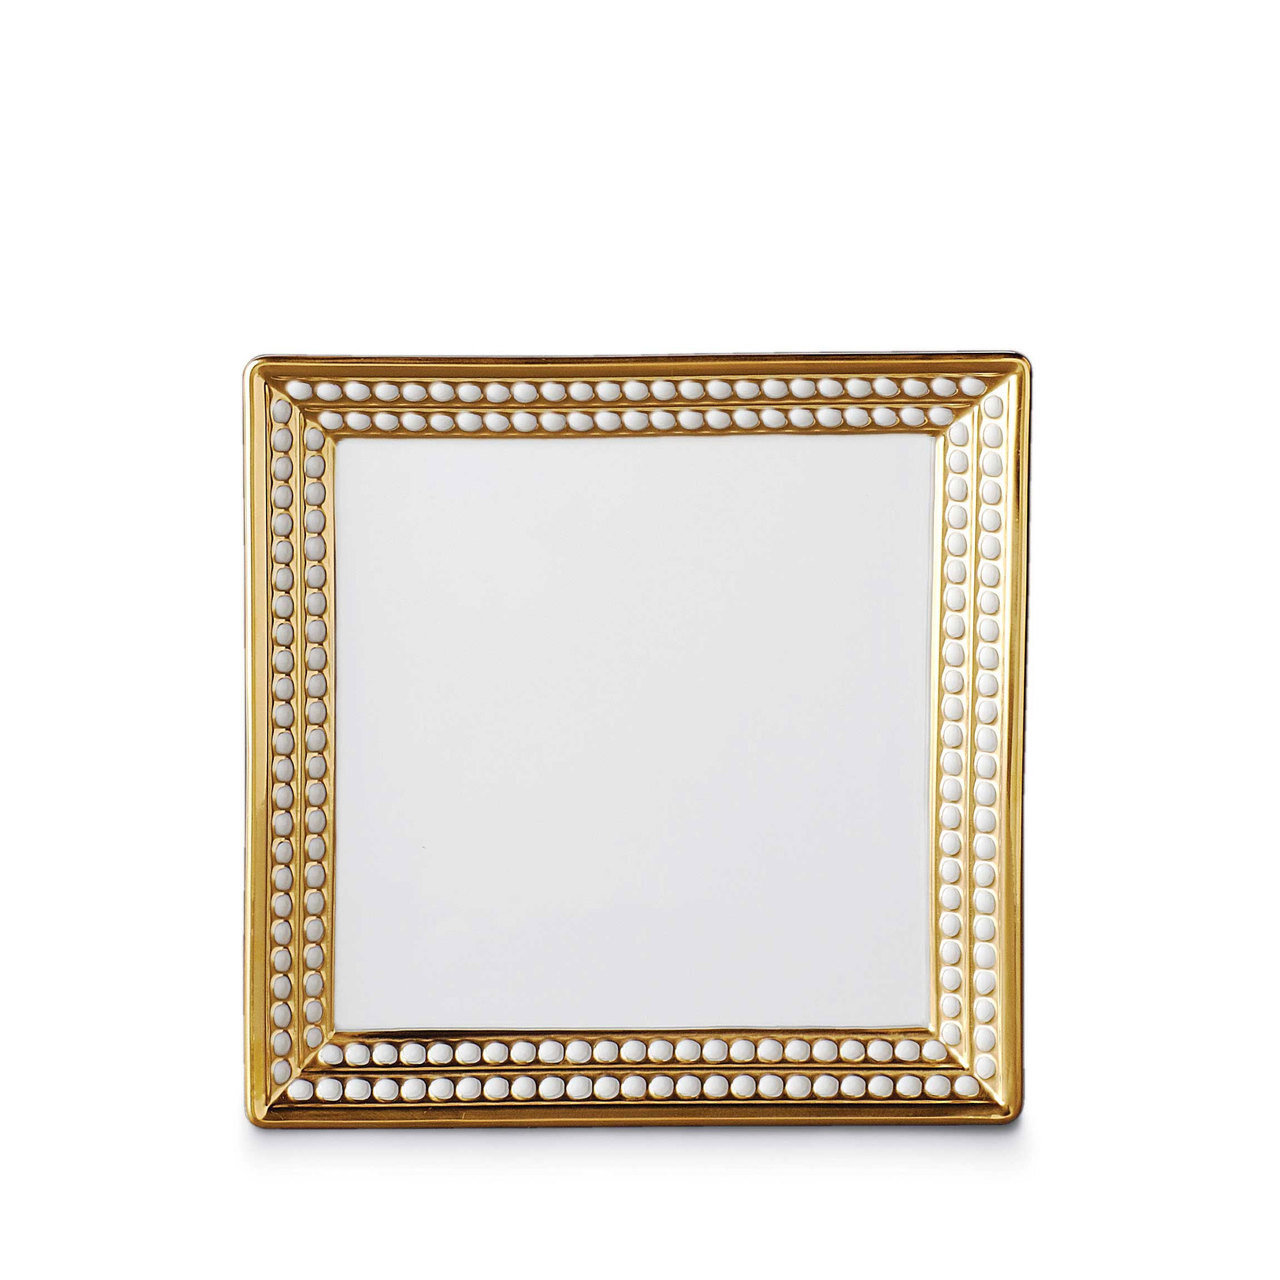 L'Objet Perlee Square Tray Gold